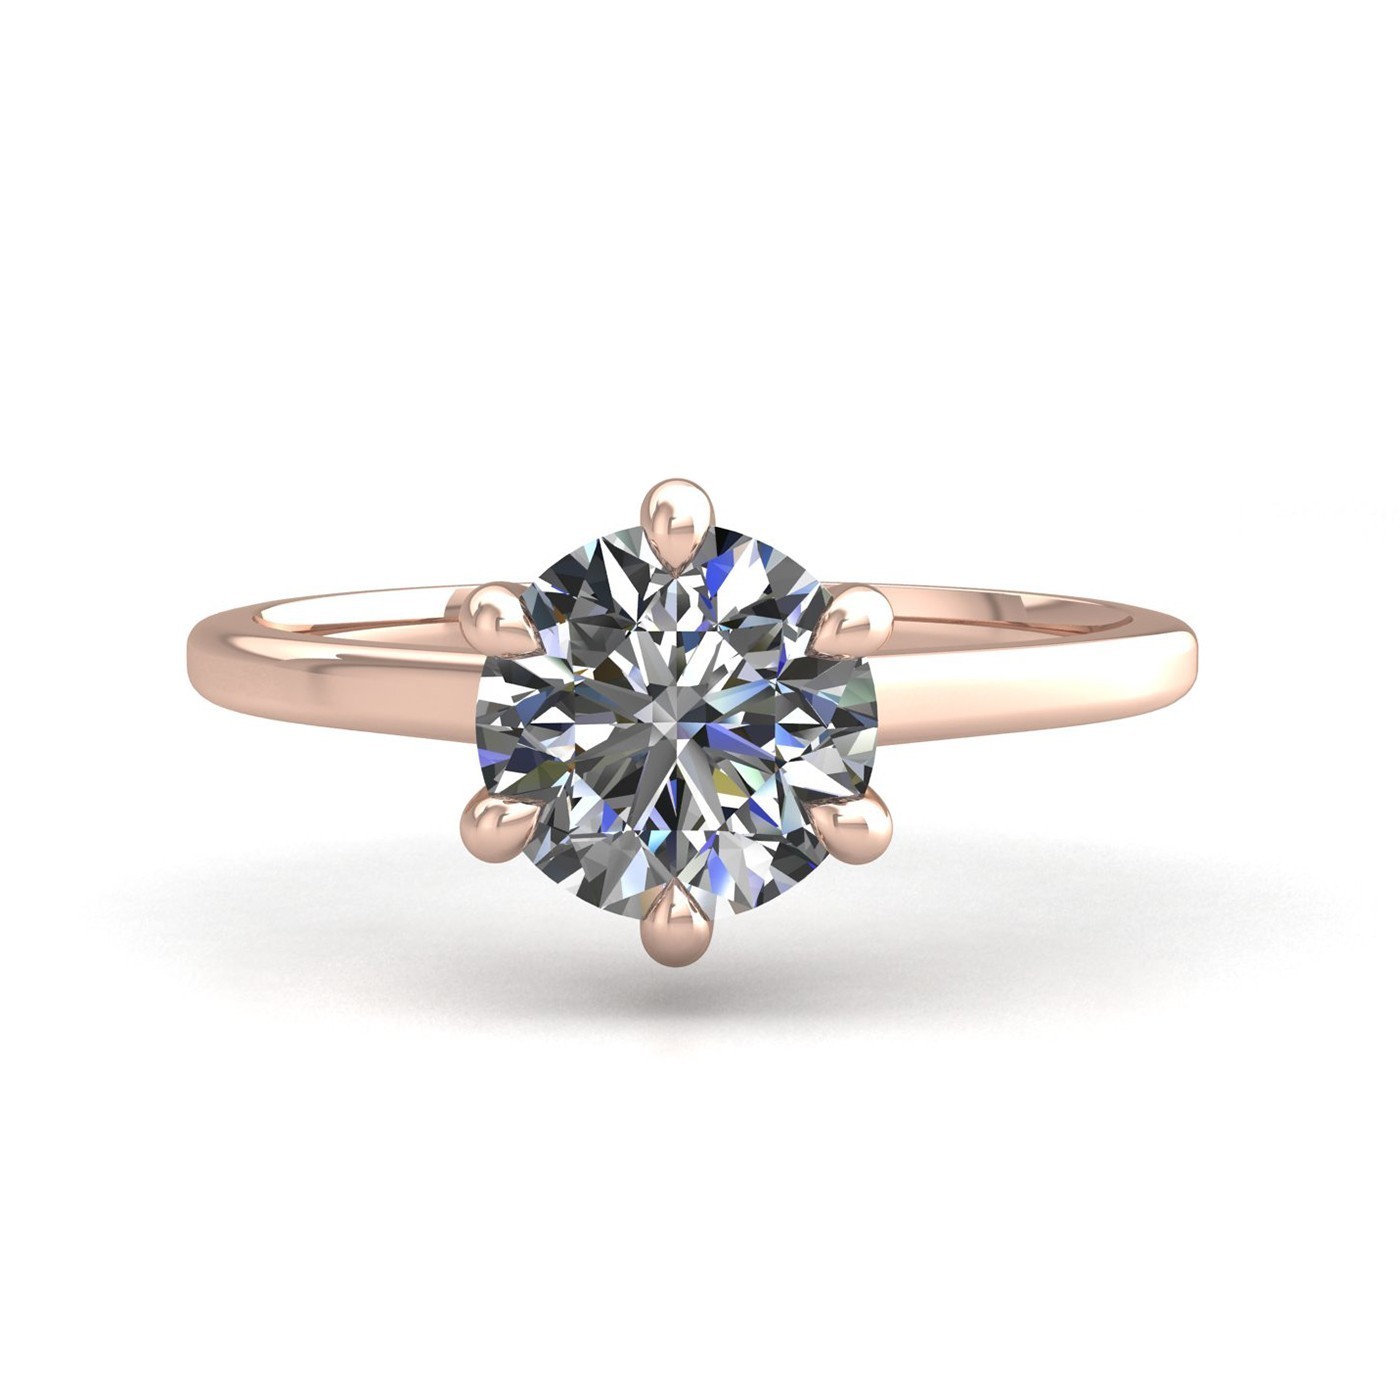 18K ROSE GOLD 6 PRONGS SOLITAIRE ROUND CUT DIAMOND ENGAGEMENT RING WITH WHISPER THIN BAND